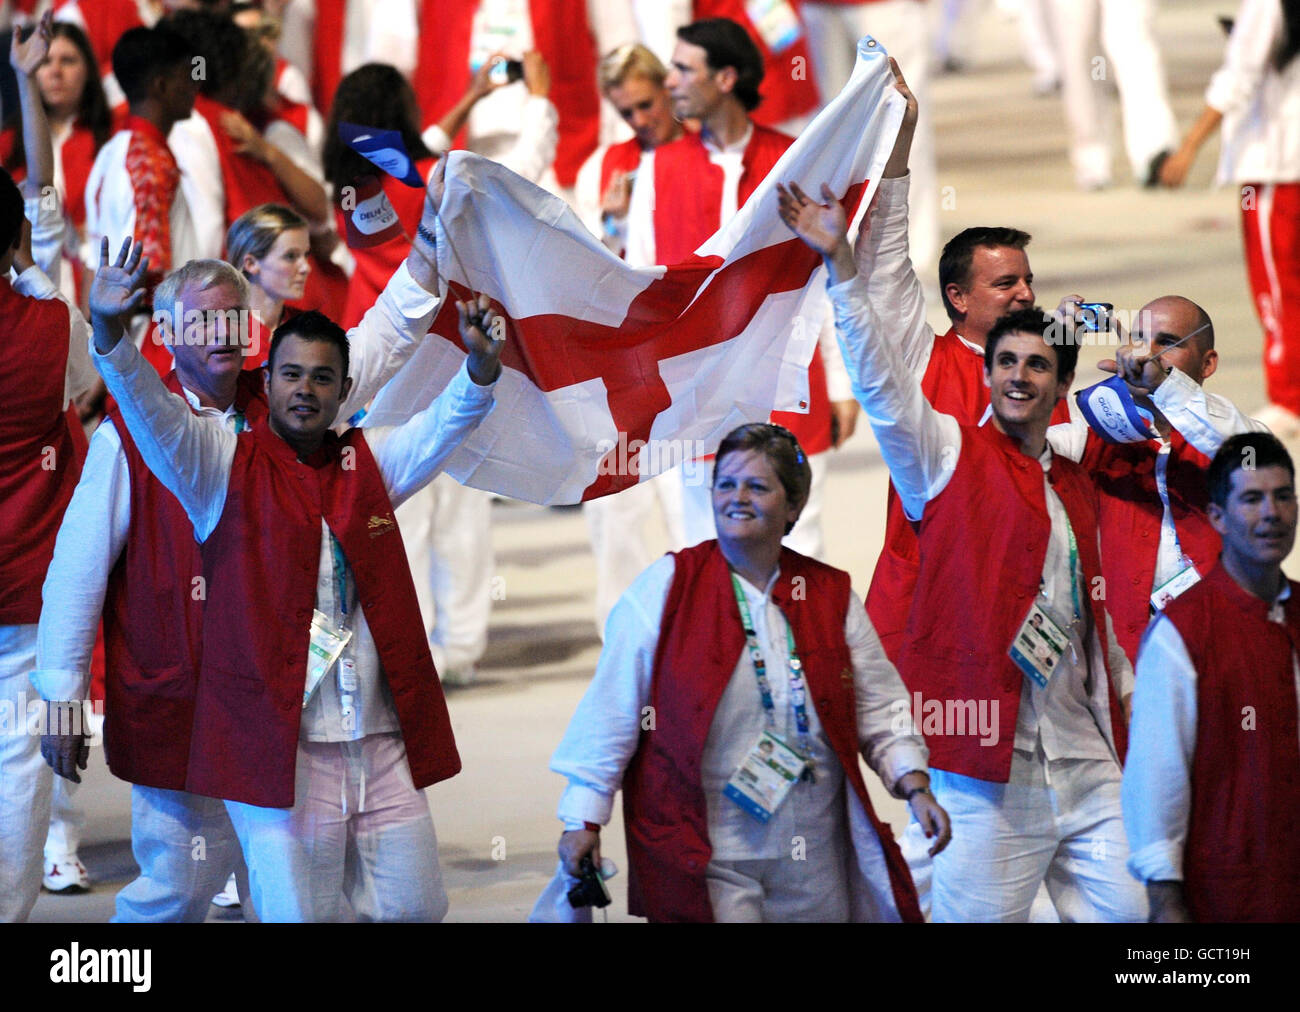 Members of the England team during the 2010 Commonwealth Games opening ceremony at the Jawaharlal Nehru Stadium in New Delhi, India. Stock Photo